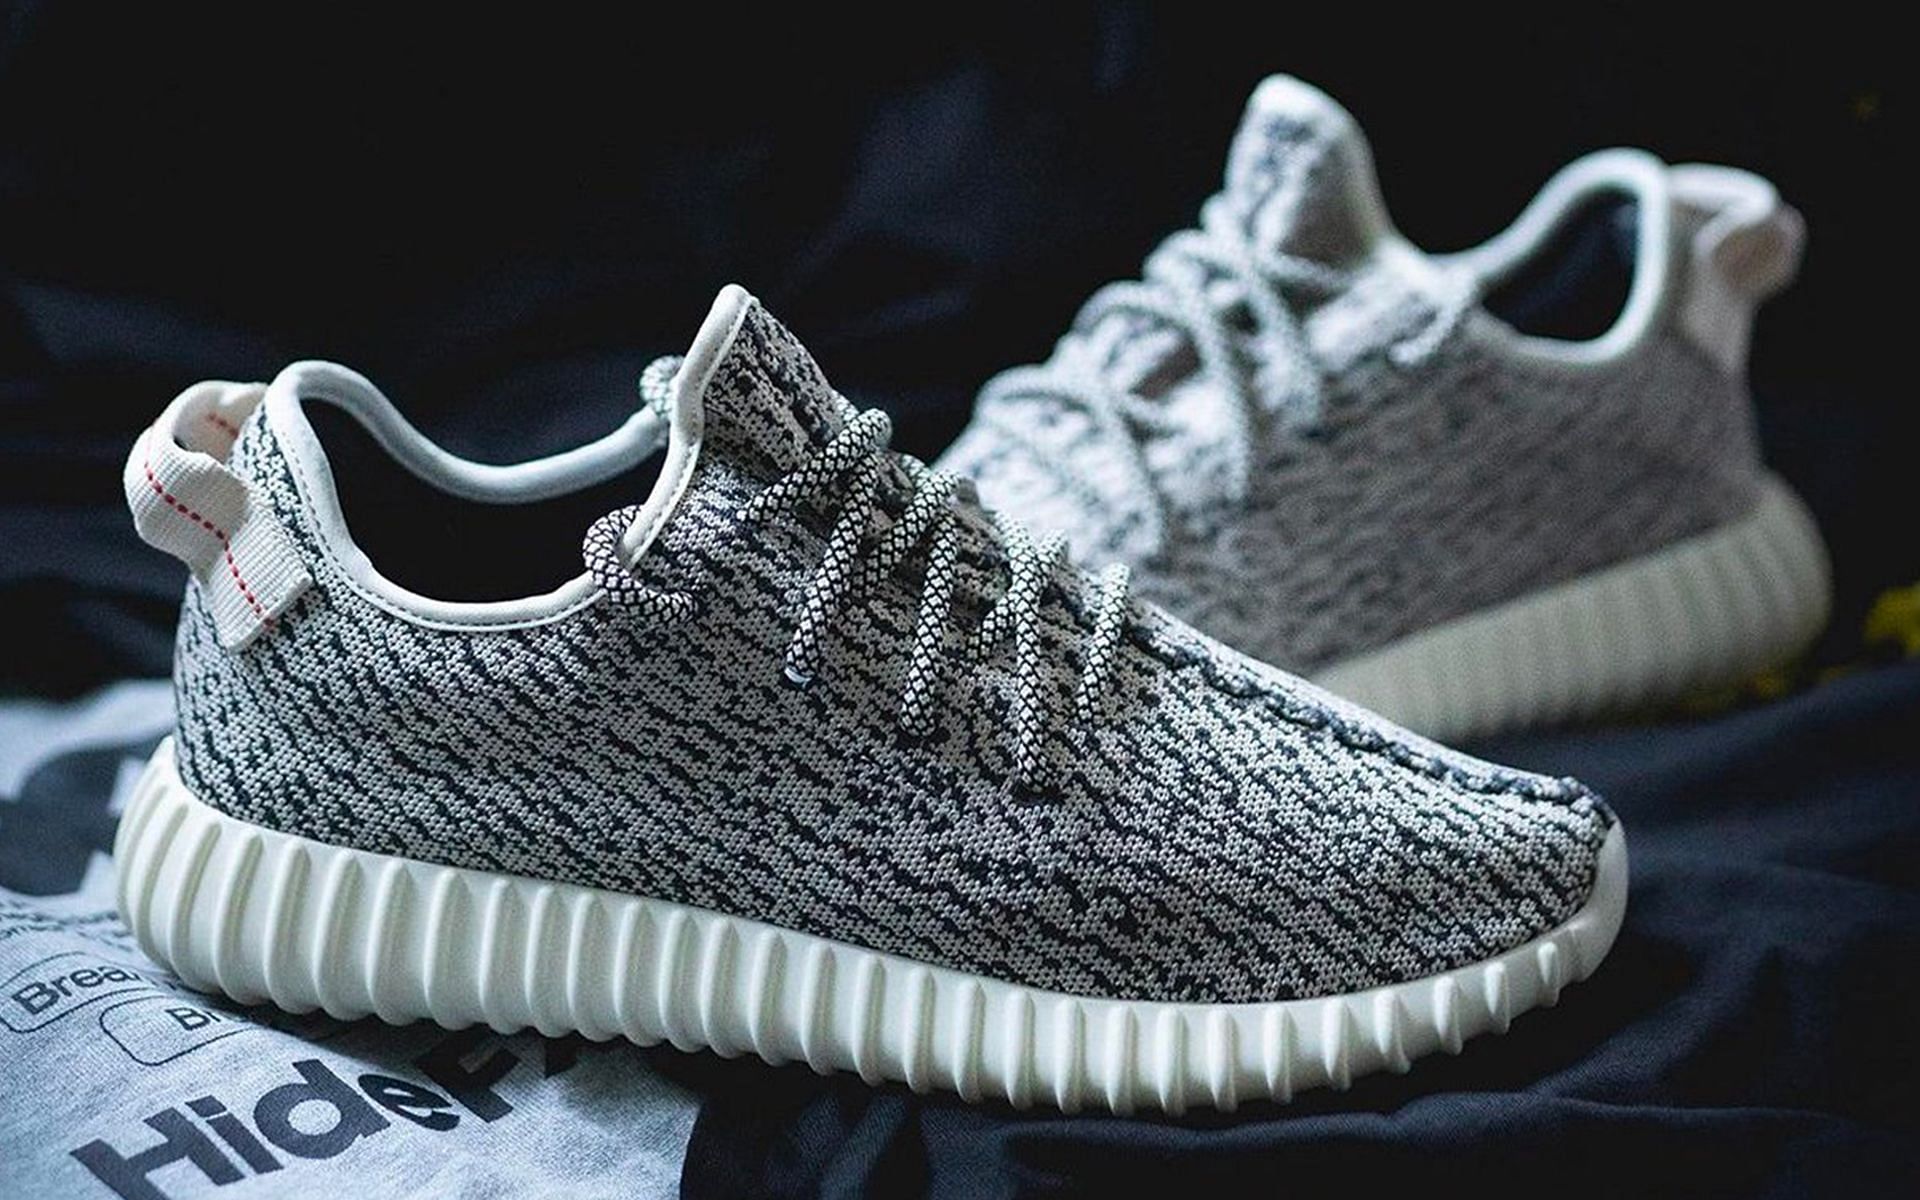 Adidas Yeezy BOOST 350 Turtle Dove will be restocked soon (Image via Knowing Kicks)